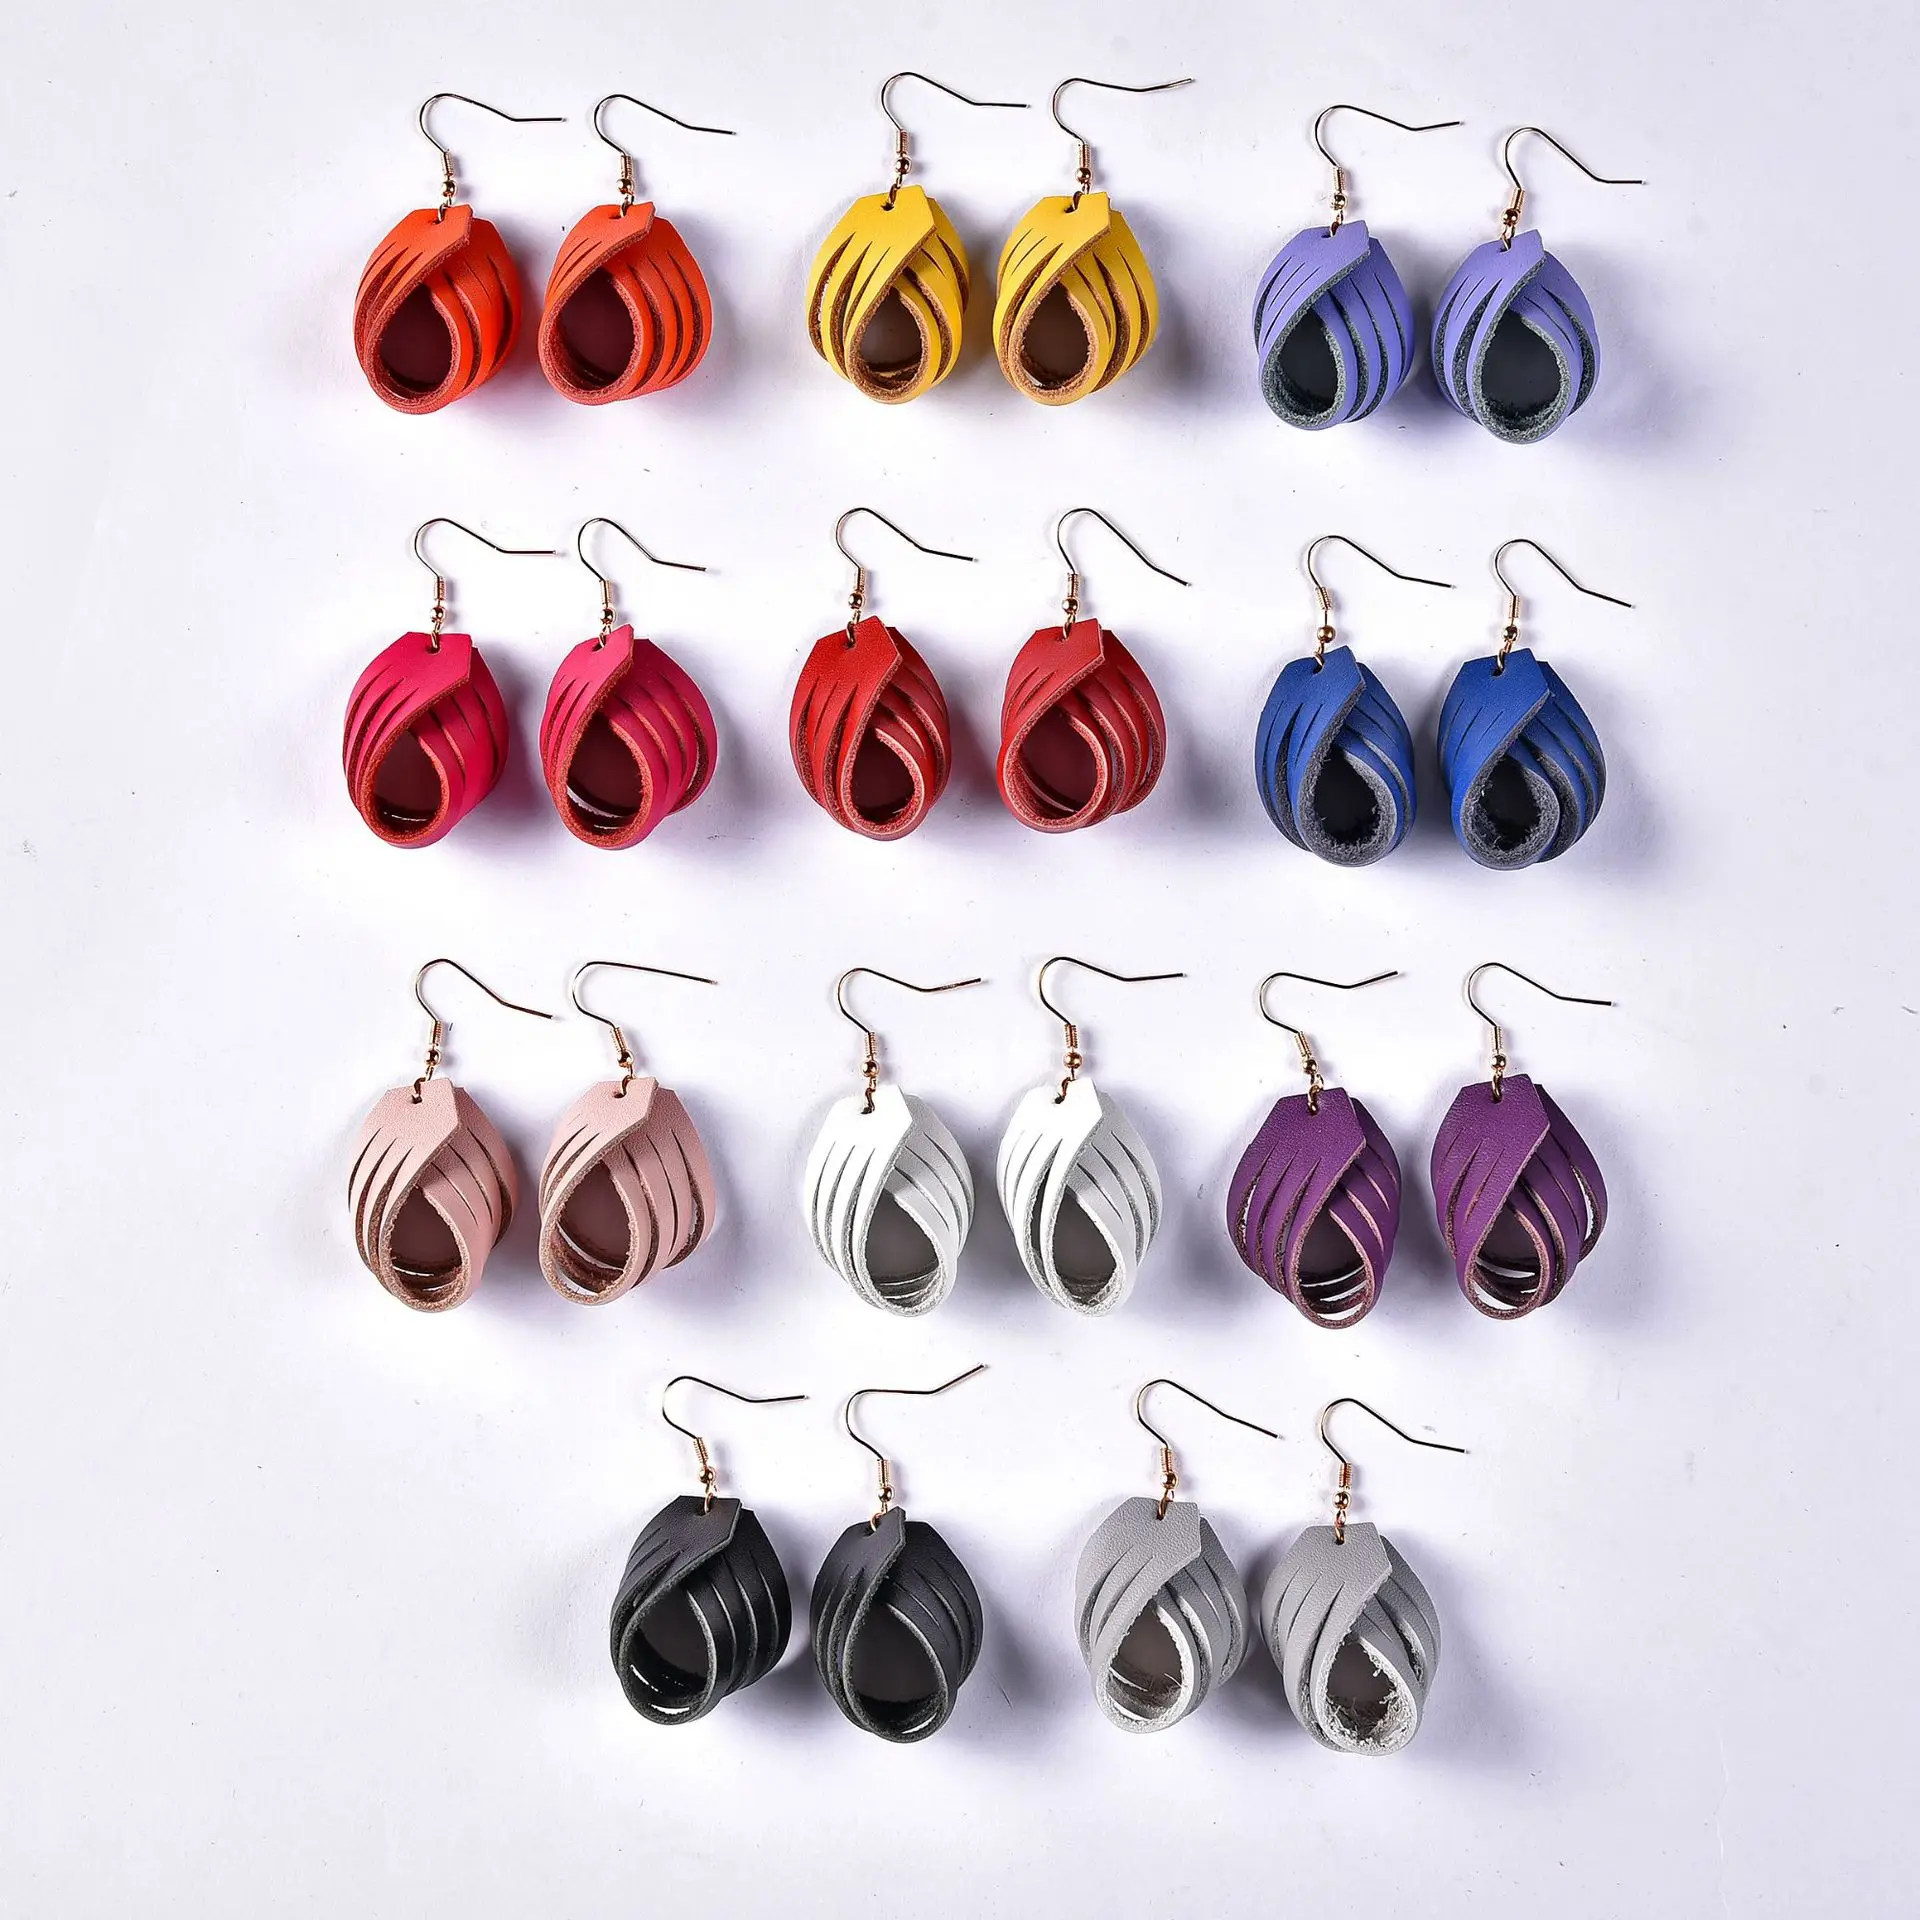 

Handmade Leather Braided Earrings Stocks Sell Wholesale Price Accept Small Order 2021 Newest Leather Jewelry Fashion Earring